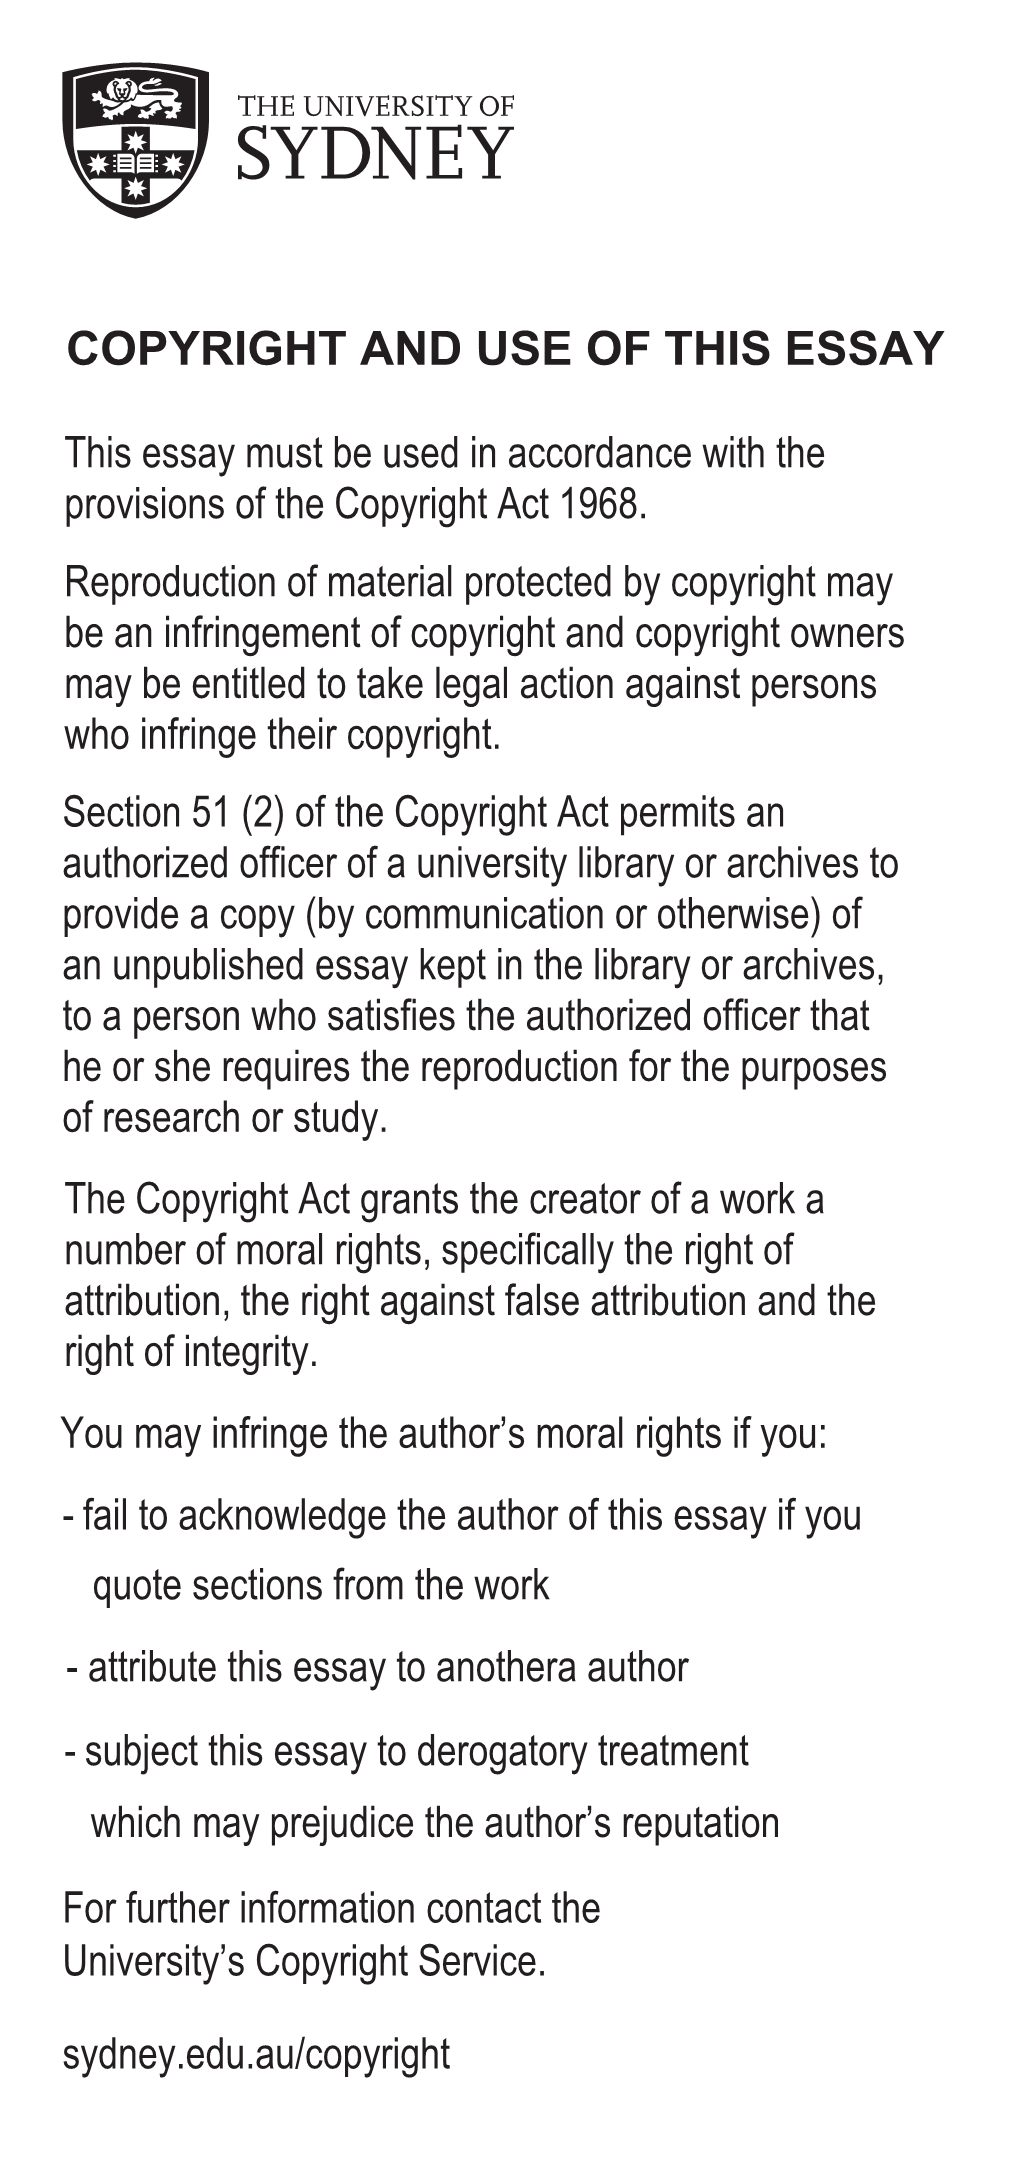 Copyright and Use of This Essay